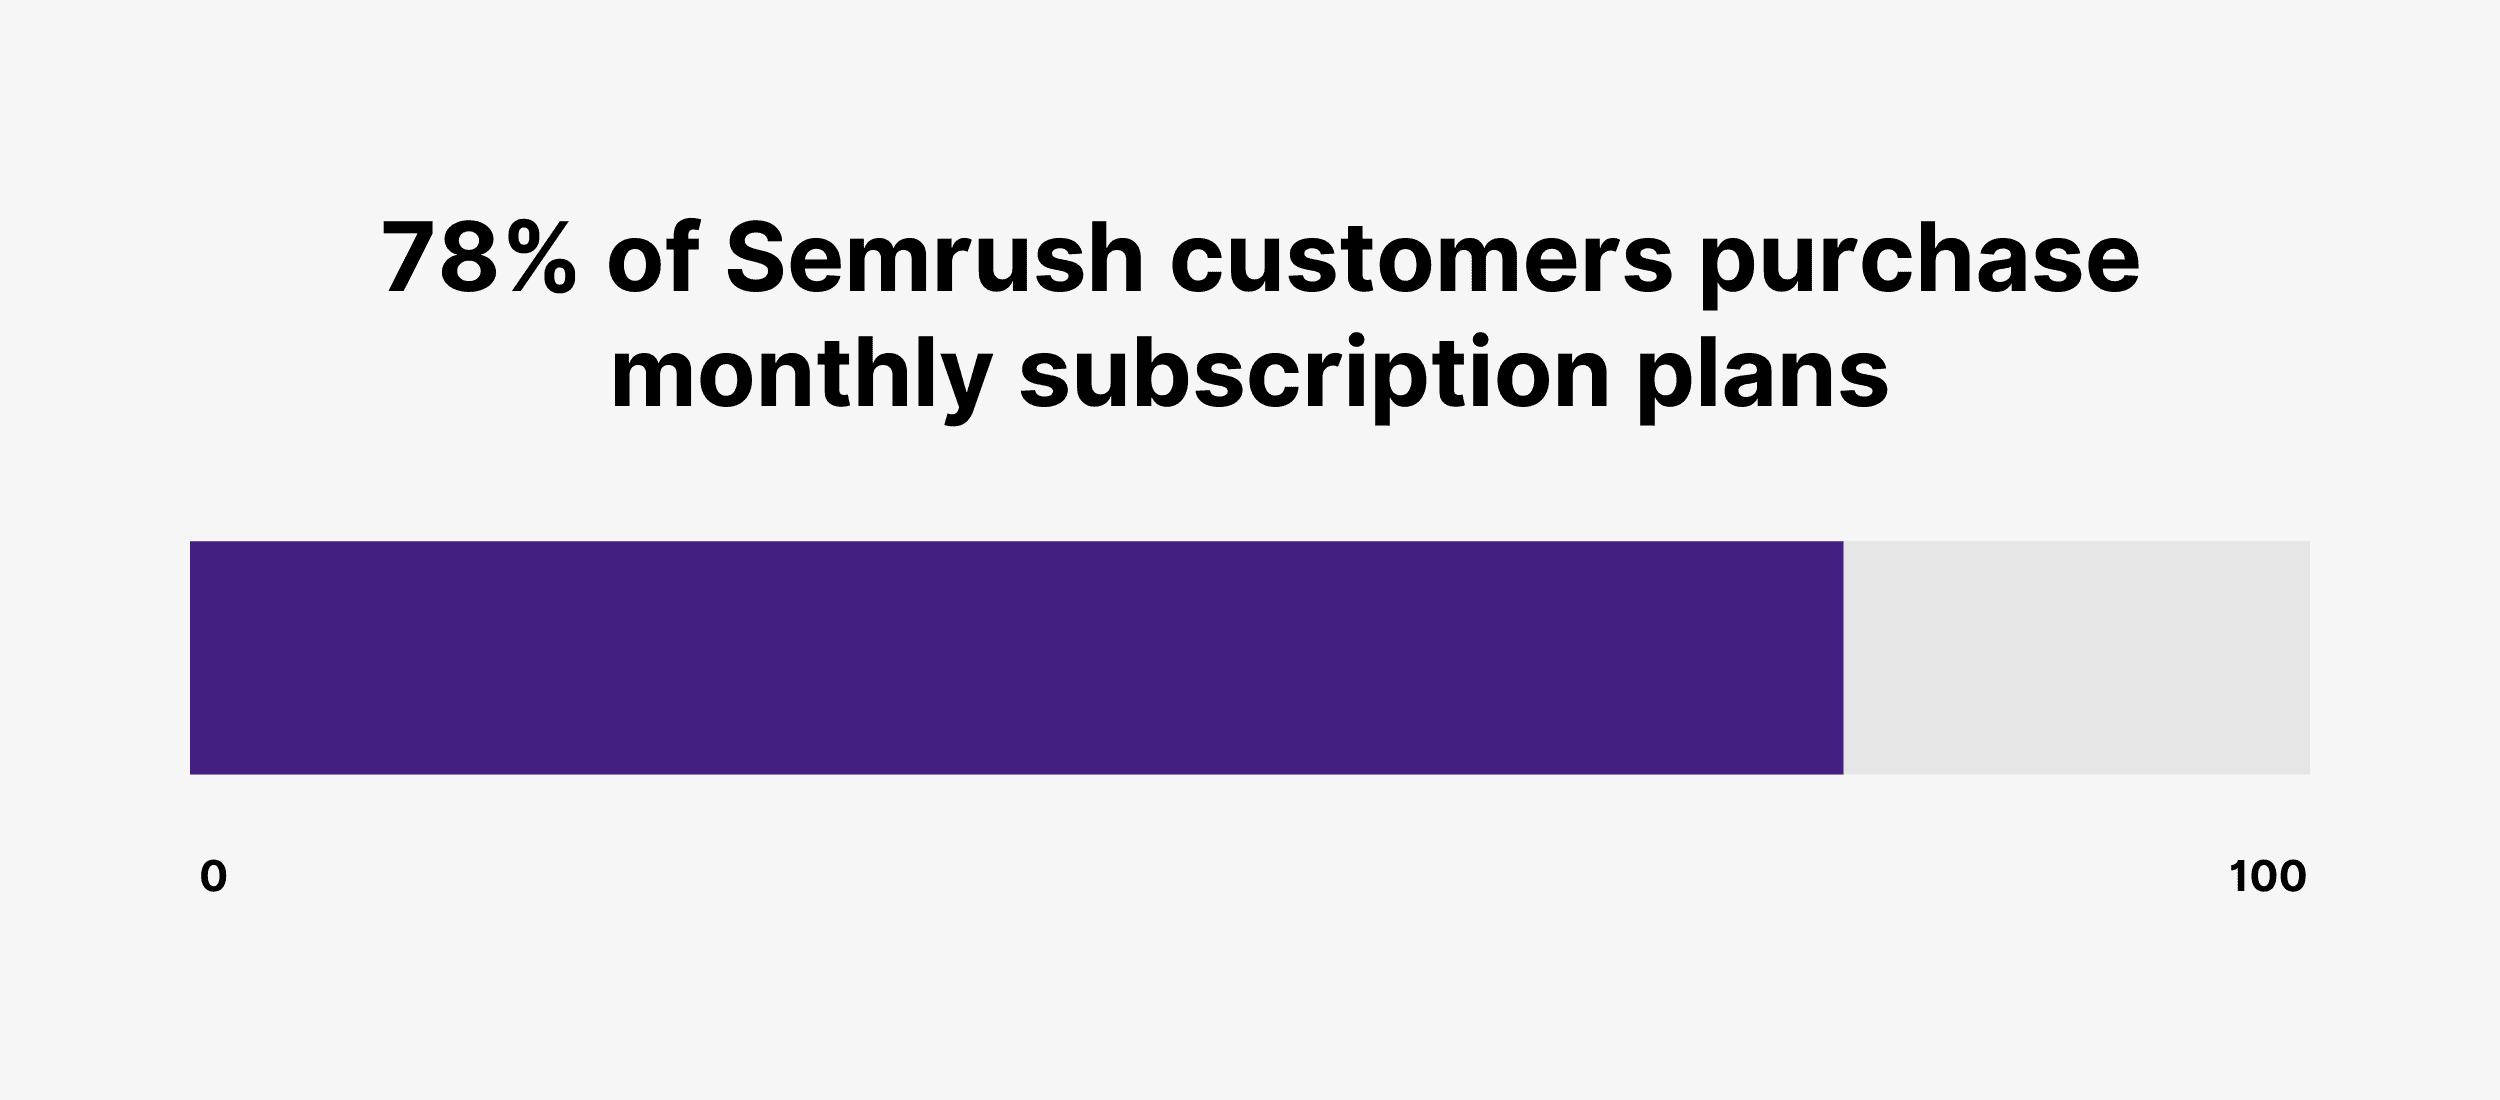 78% of Semrush customers purchase monthly subscription plans